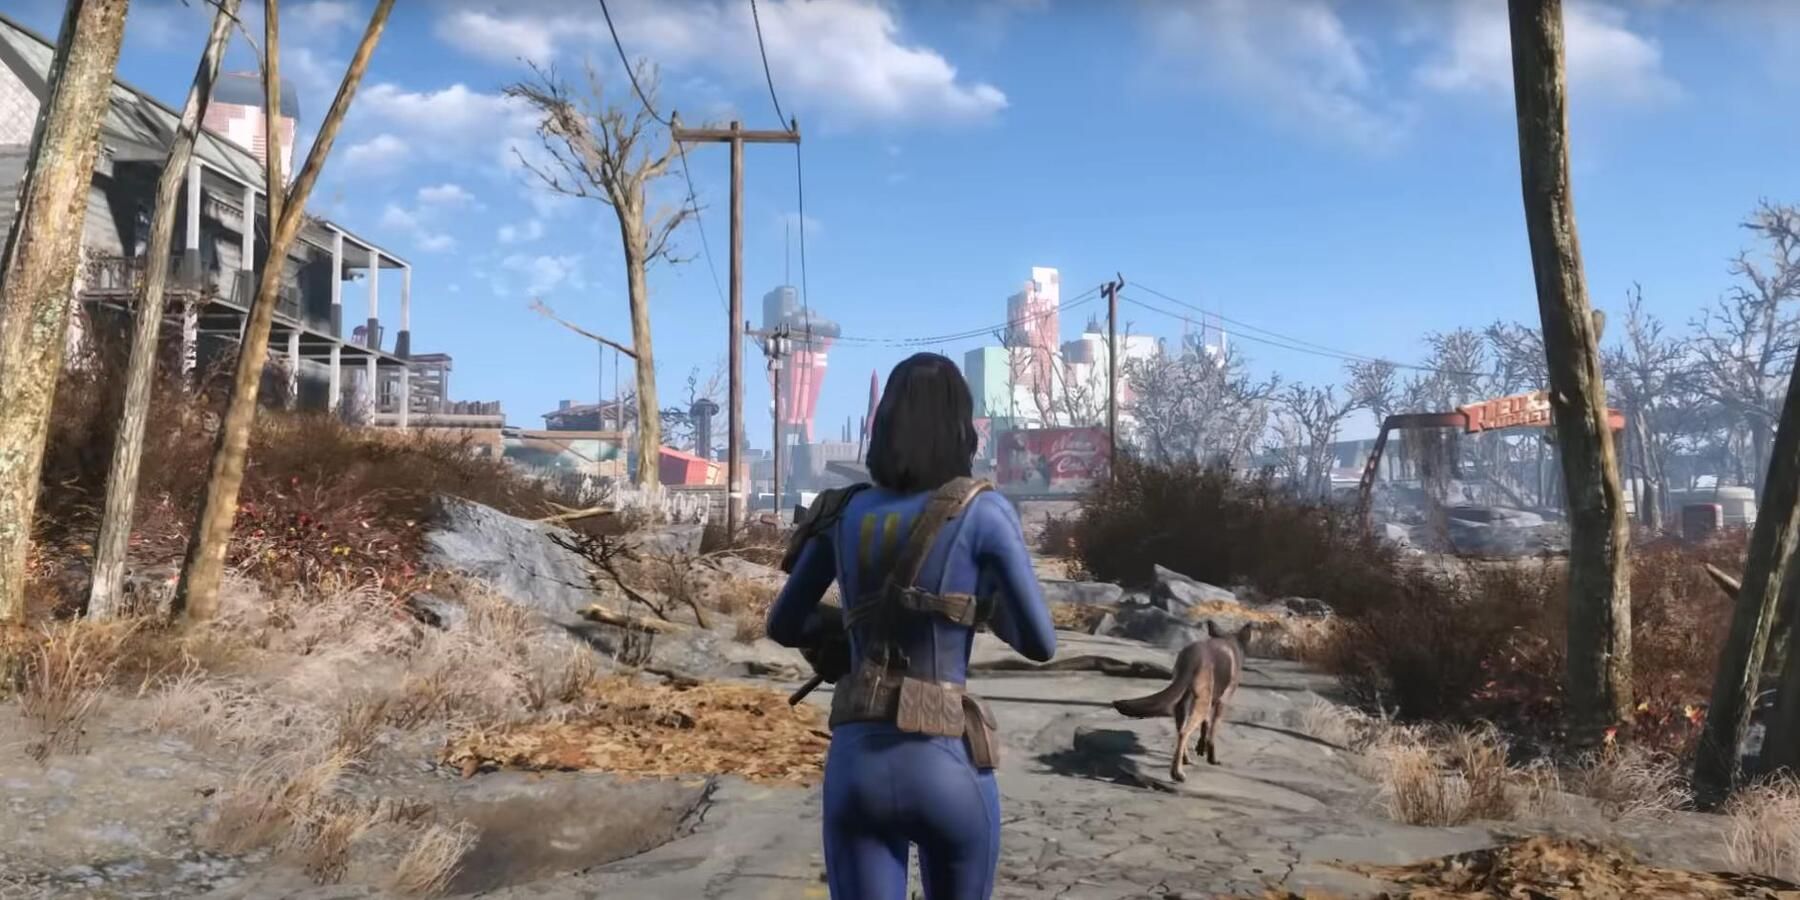 Exploring the Wasteland in Fallout 4